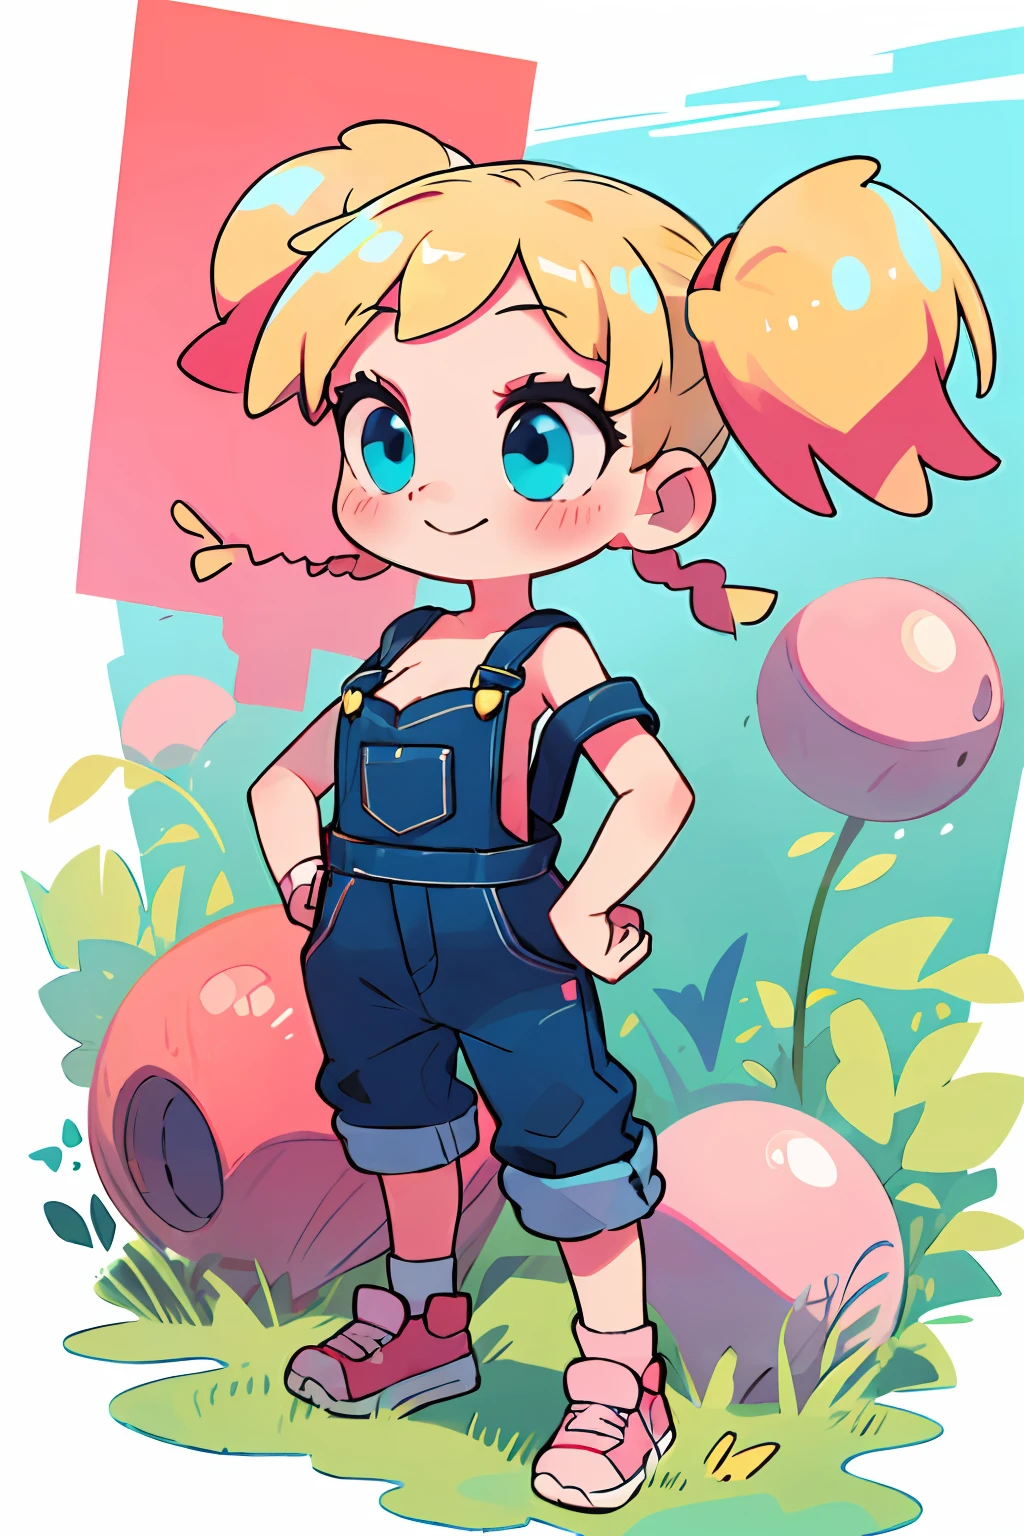 masterpiece, beautiful, 4k, detailed, intricate details, , , overalls, jean overalls, cuffed overalls, blonde hair, long blonde pigtails, hair ballies, pink hair tie balls, long flowing pigtails, soft blue eyes, soft smile, slight smile, hands back, standing on the balls of her feet, 1girl, rocking, shirtless, overalls over skin, bare shoulders, bare sleeves, bare arms, medium sized breasts, cleavage, cleavage behind overalls, facing forward, side cut, torso sohown